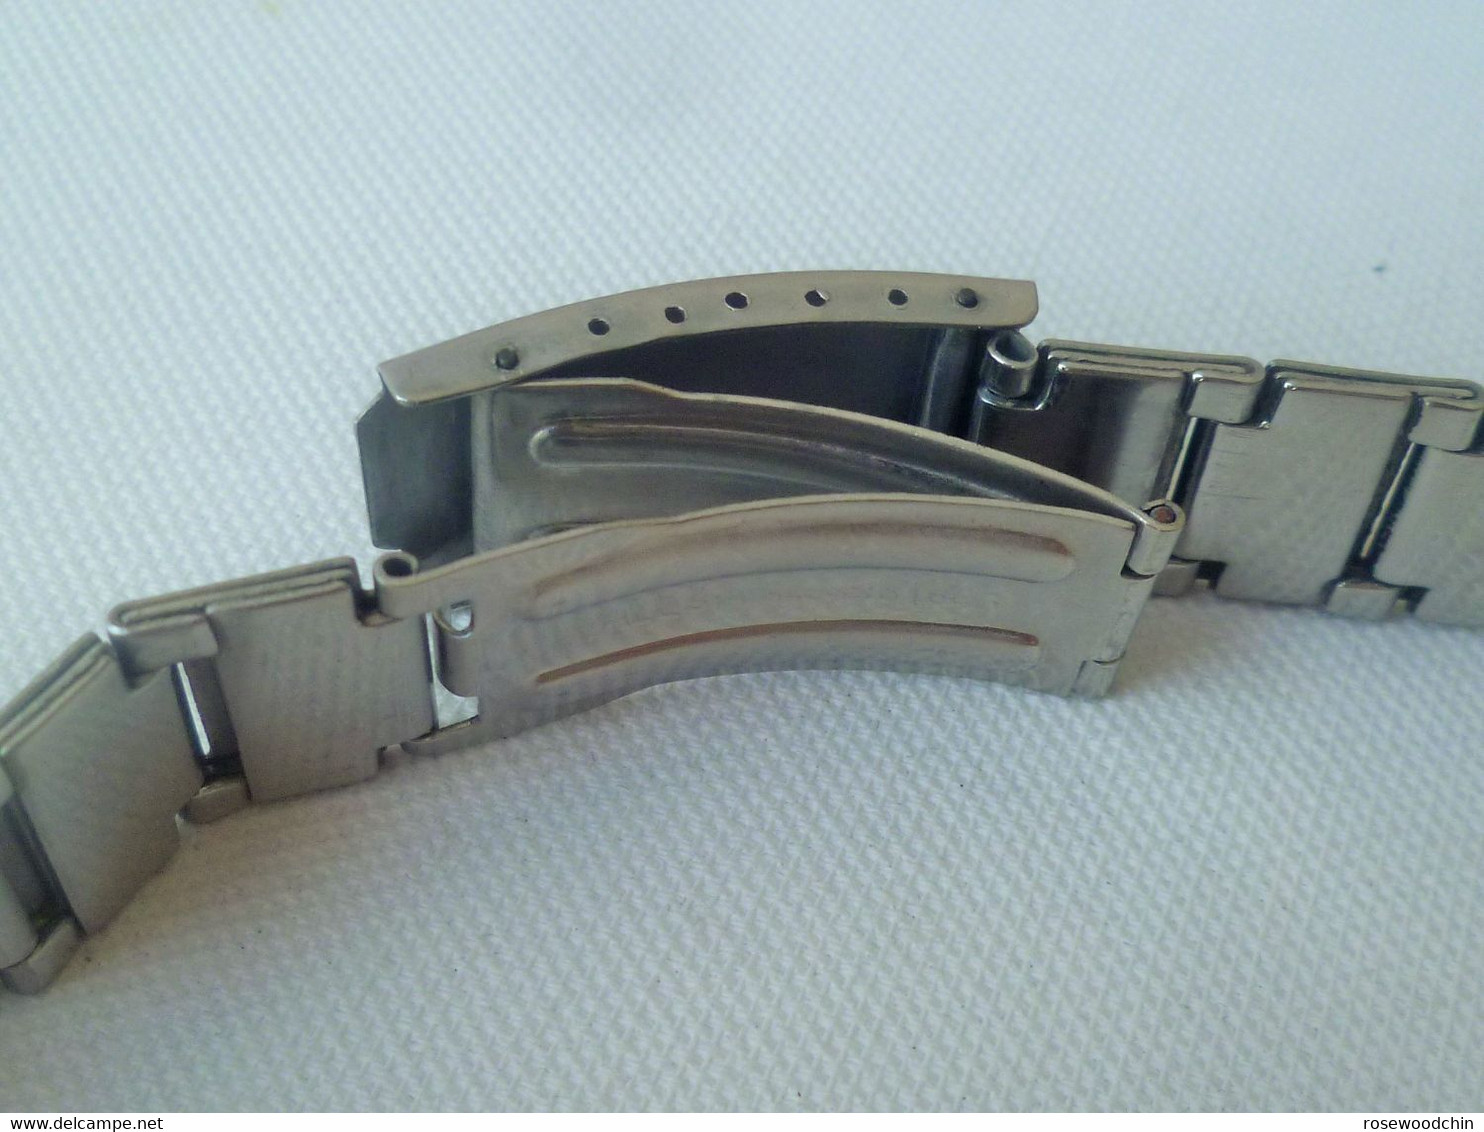 Vintage ! All Stainless Steel Watch Band Bracelet Lug 19/20 mm (#50)